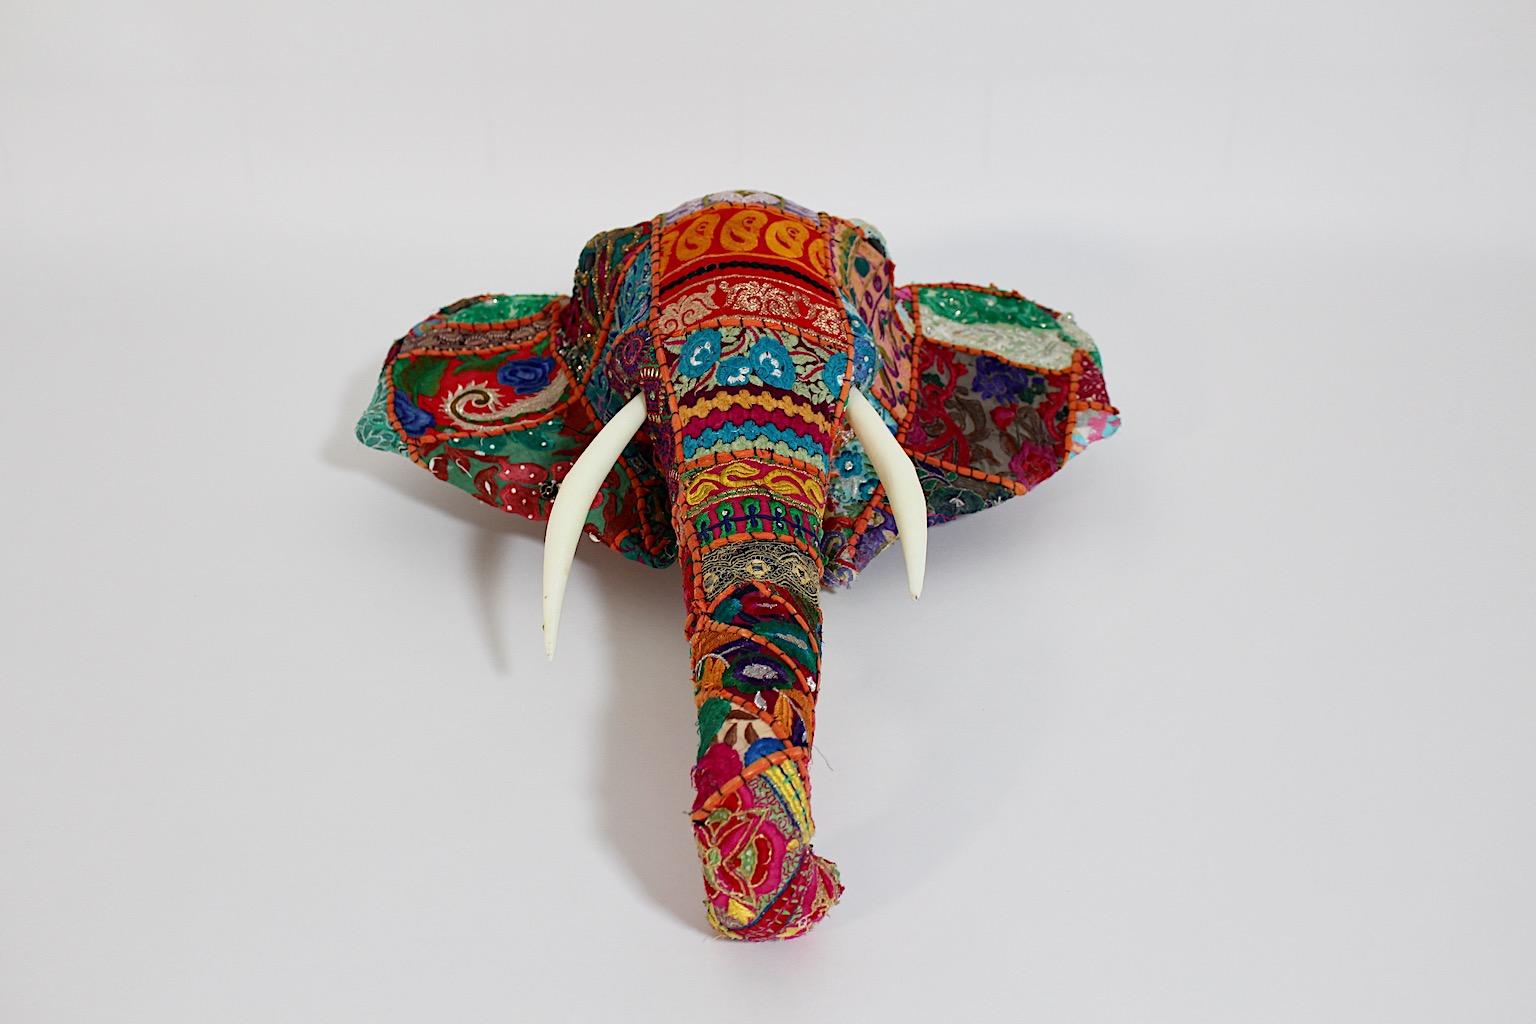 Indian Animal Folk Art Vintage Patchwork Fabric Embroidery Elephant Head c 1980s India For Sale